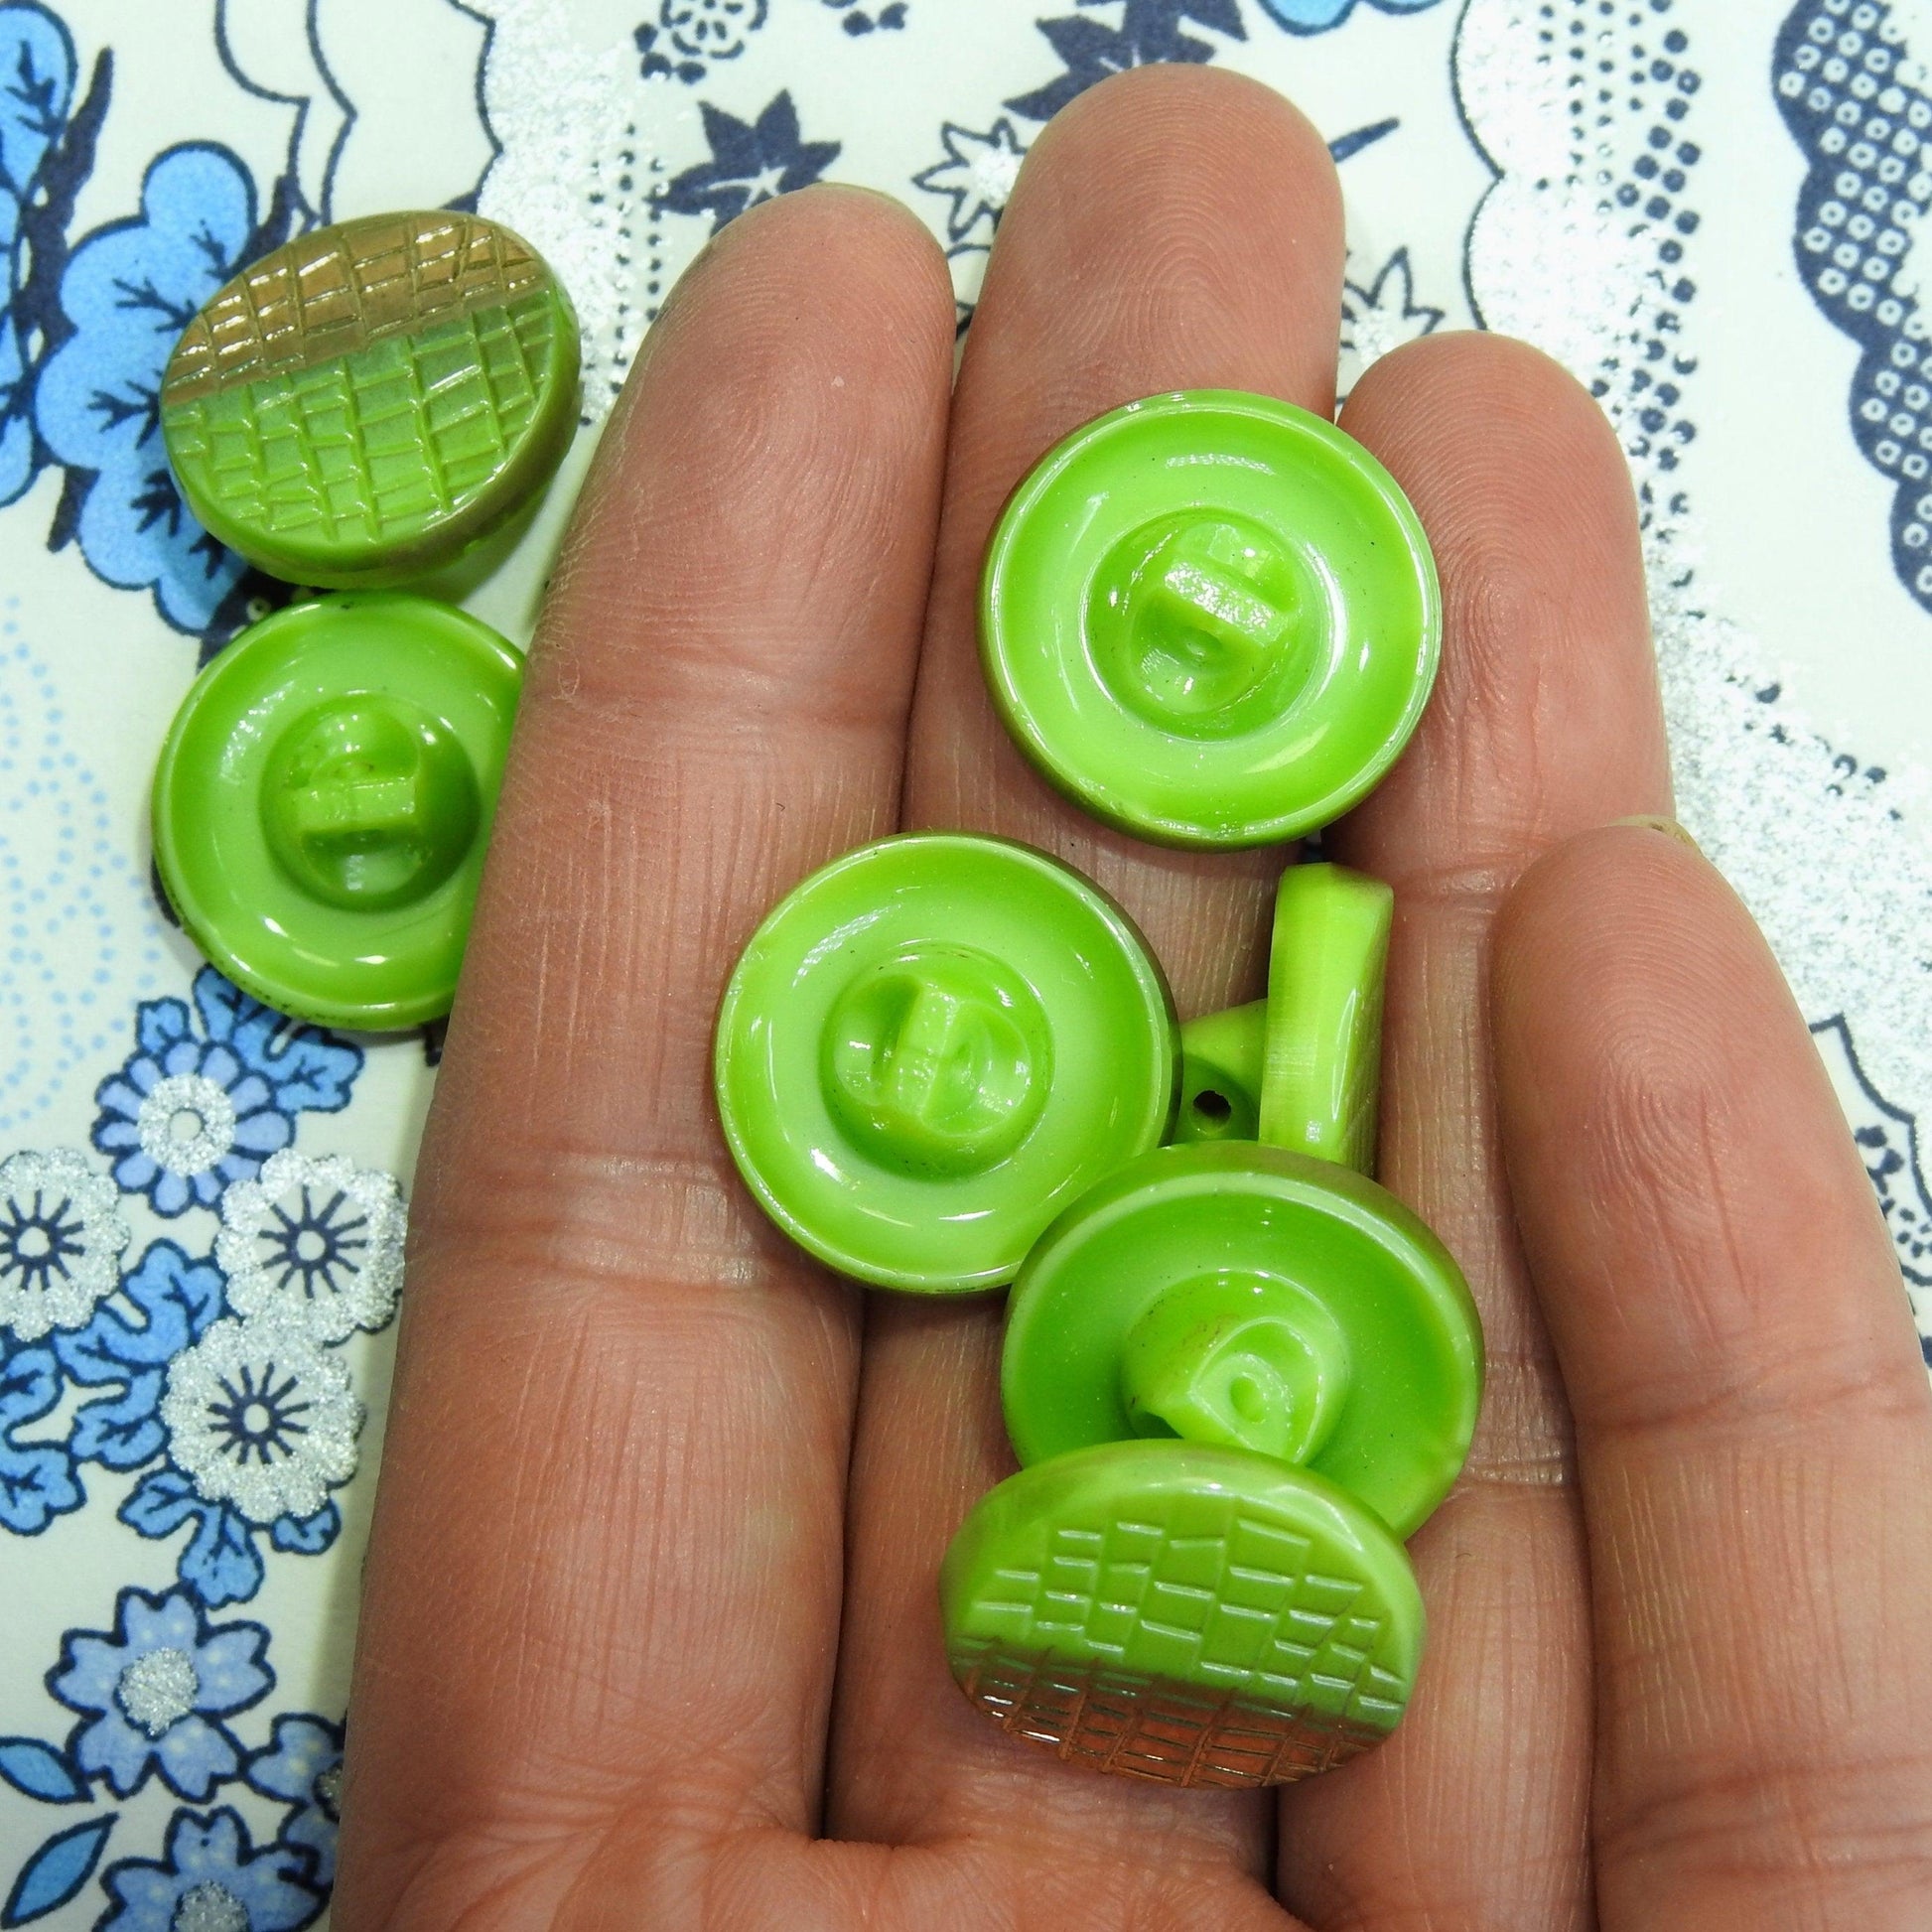 vintage looking buttons